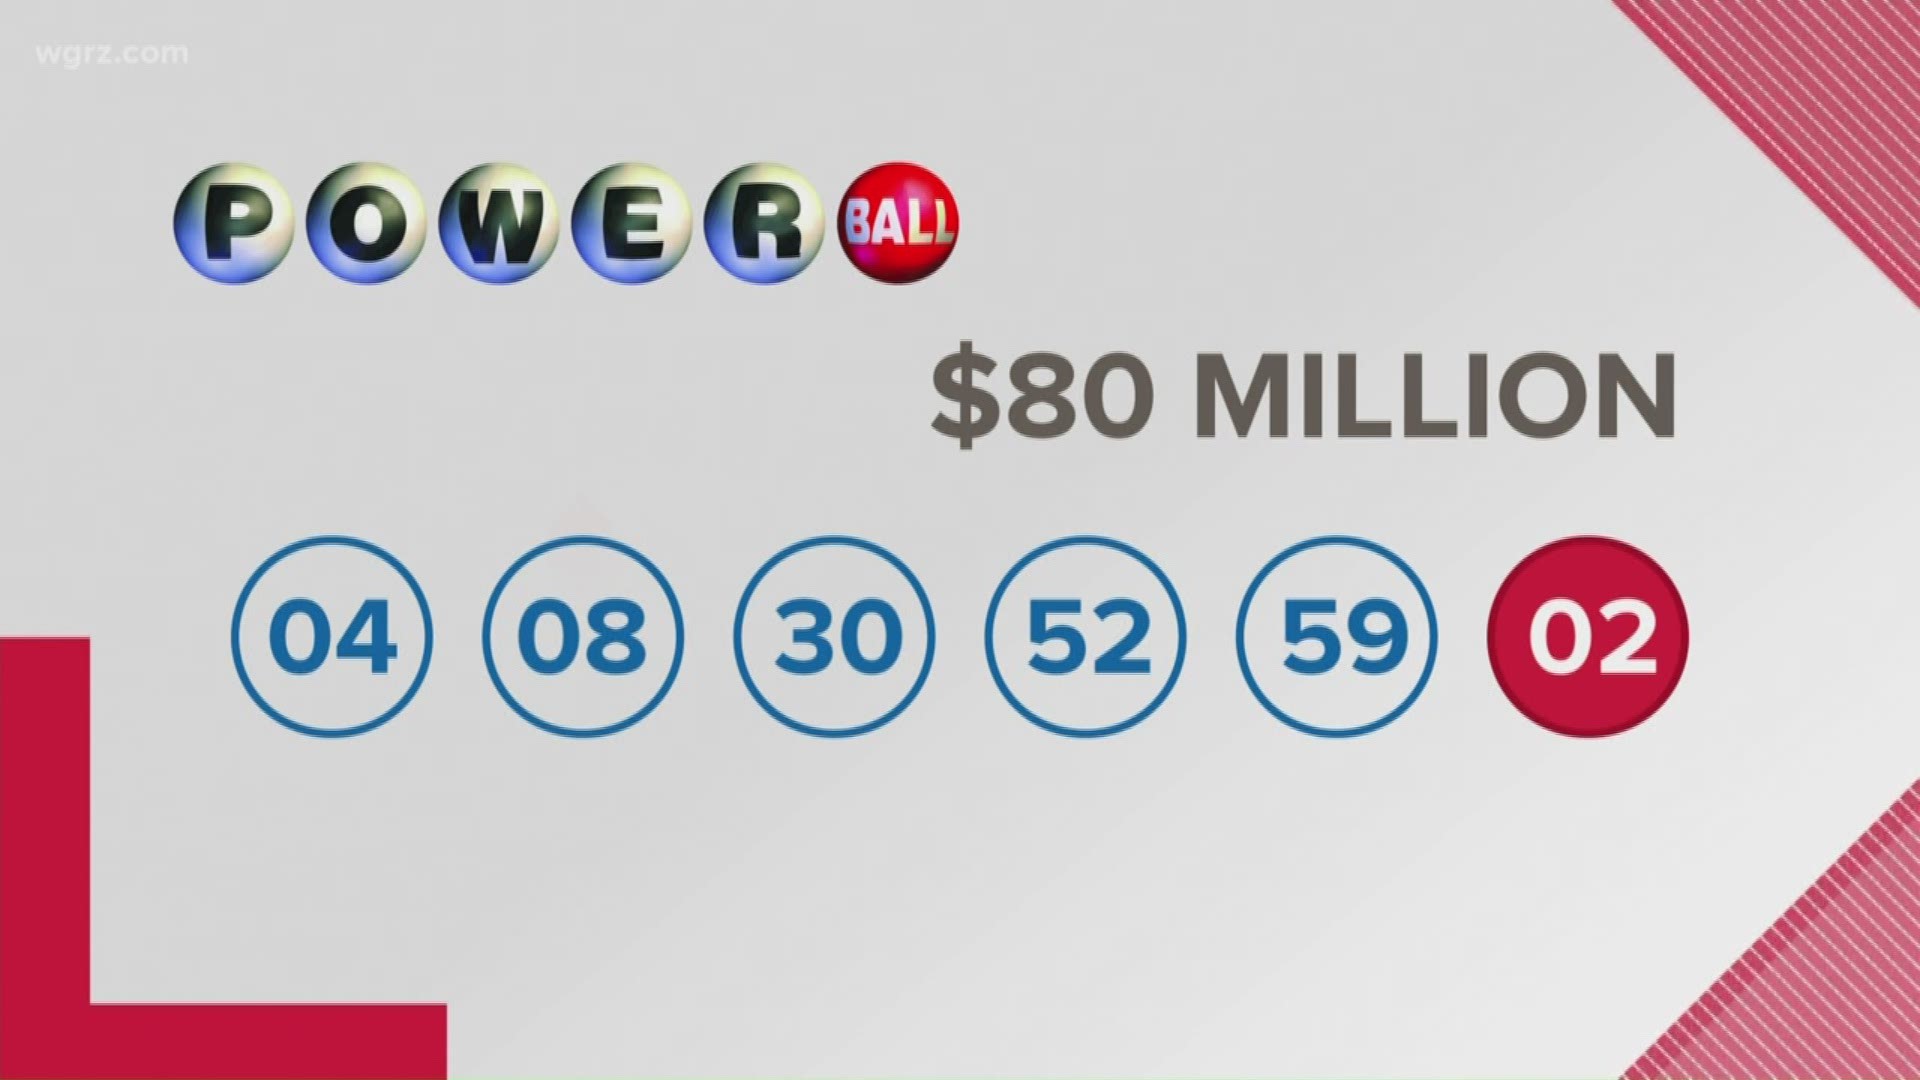 lotto and powerball days